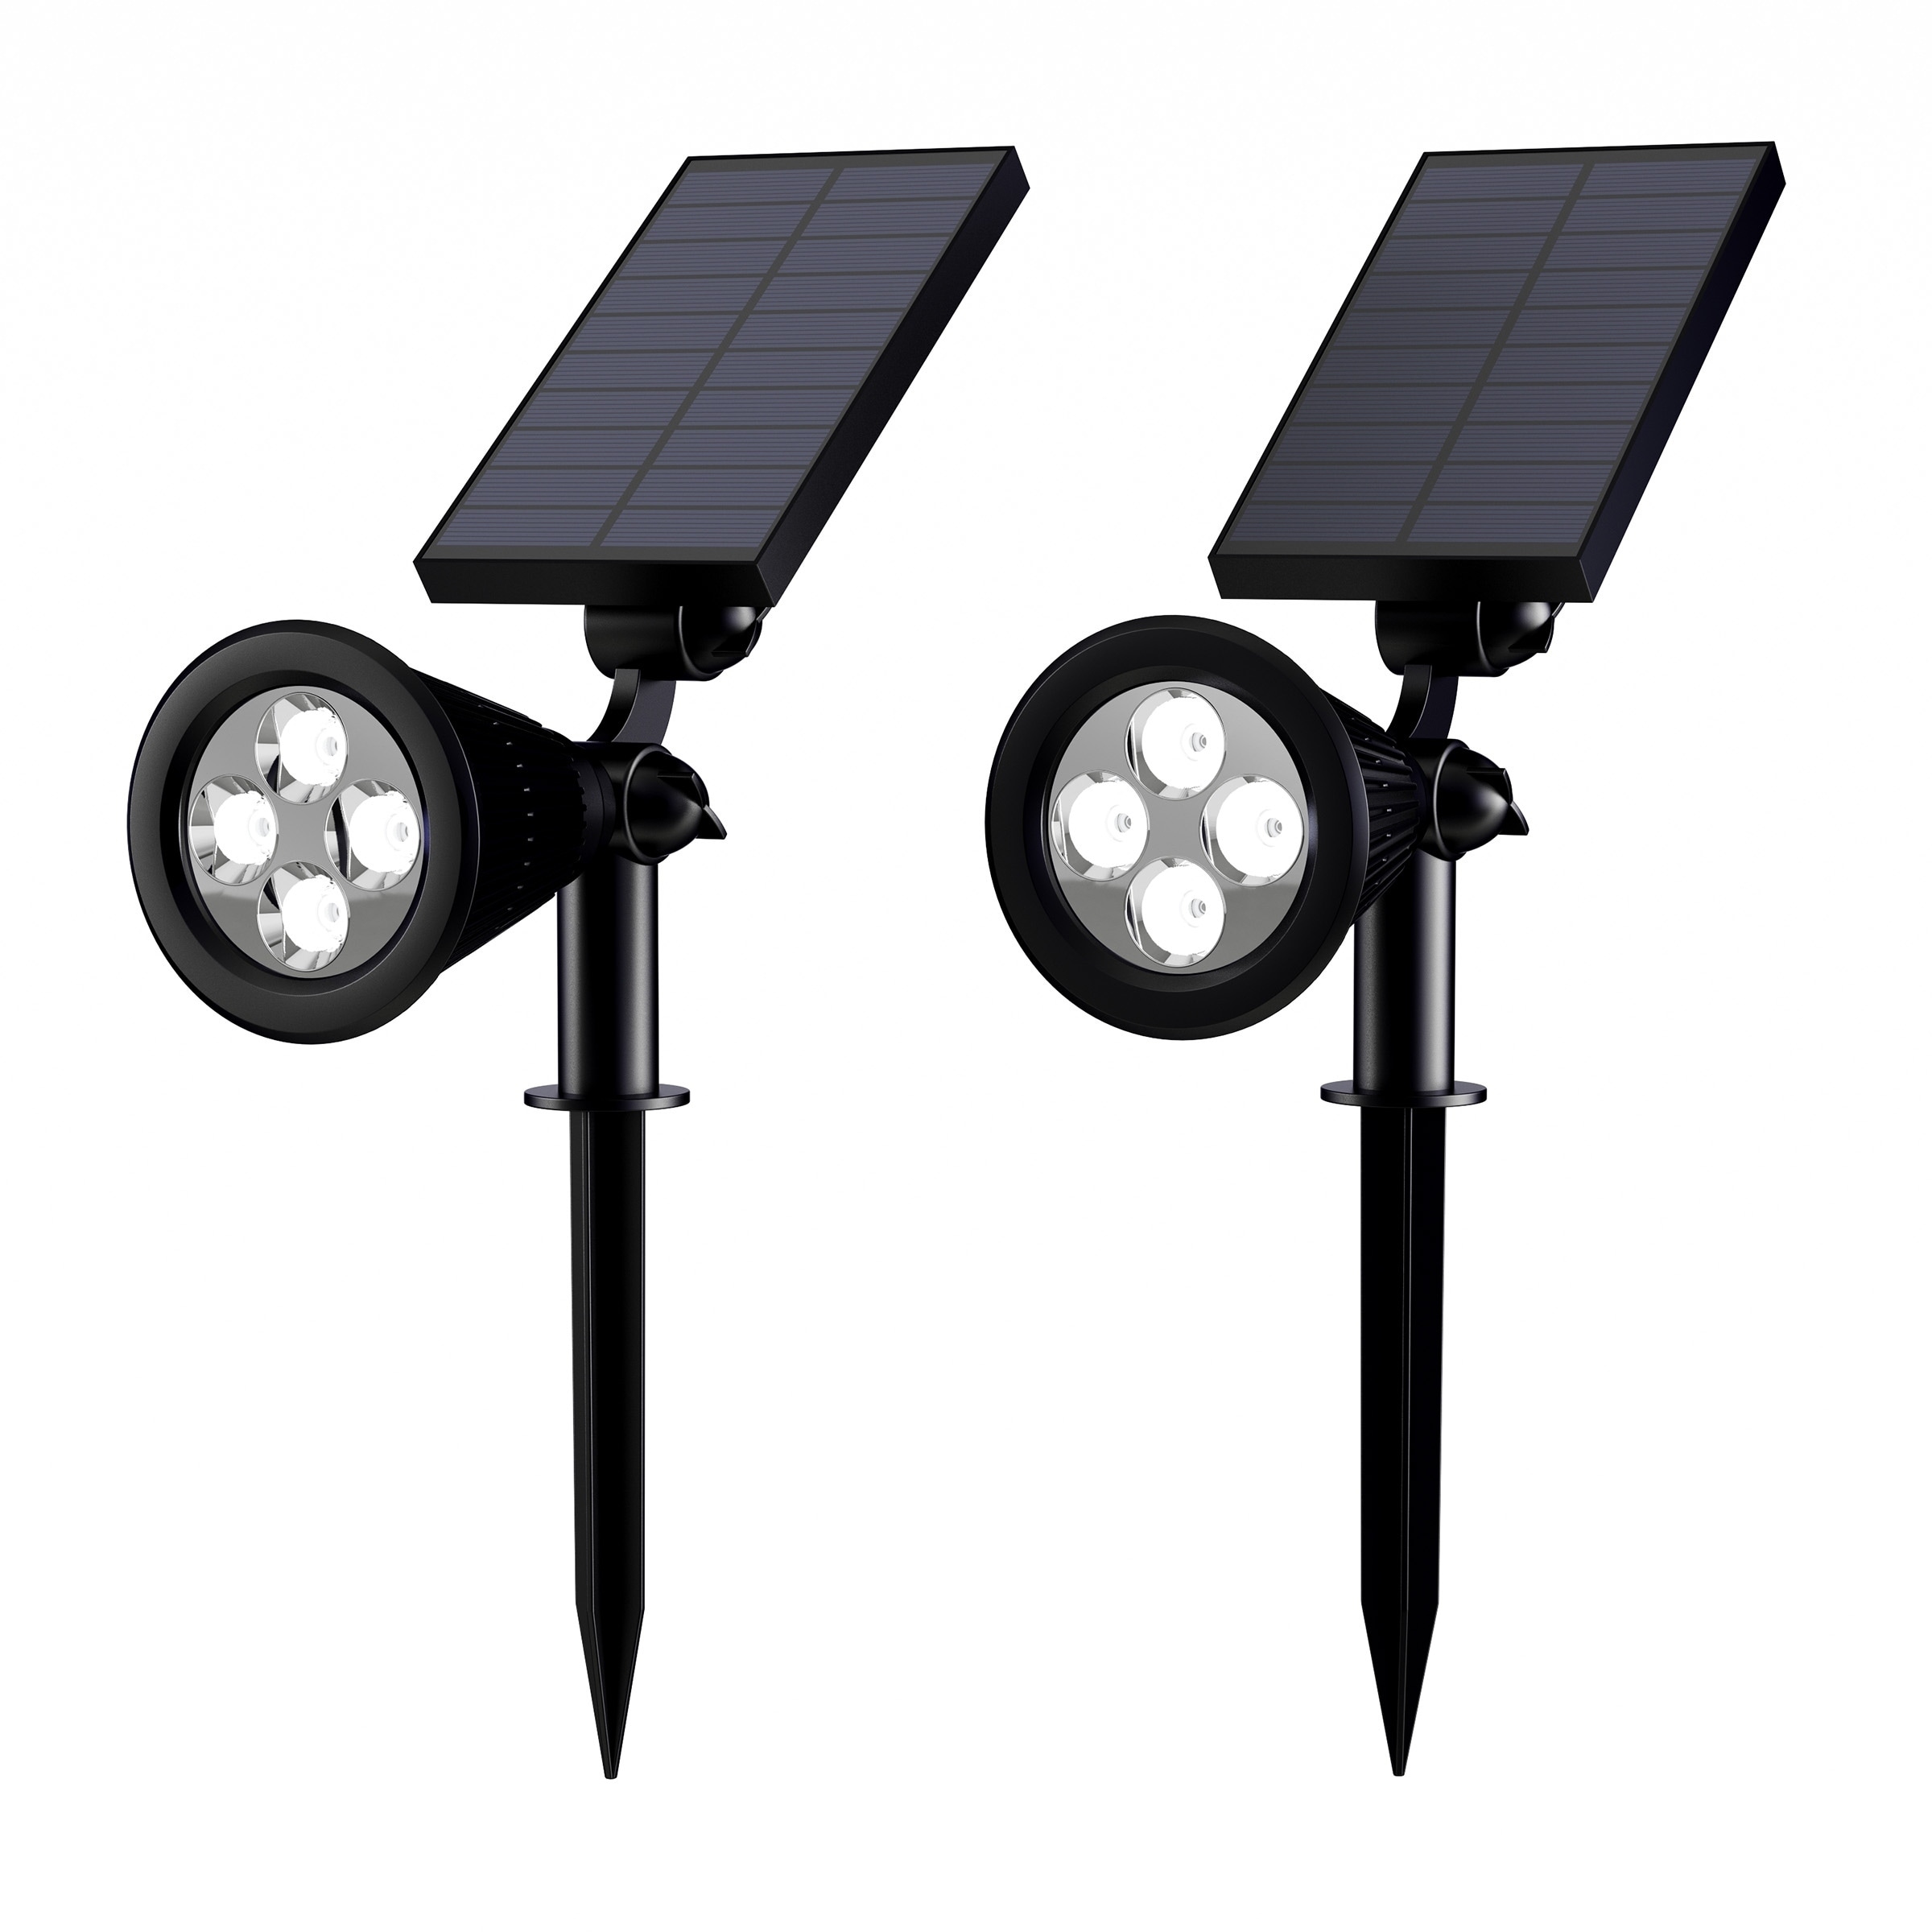 Solar Powered Outdoor -Set of 2 Landscape Lights-Ground Stakes or Wall Mountable, 4 LED Bulbs by Pure Garden. - On - Overstock - 25621429